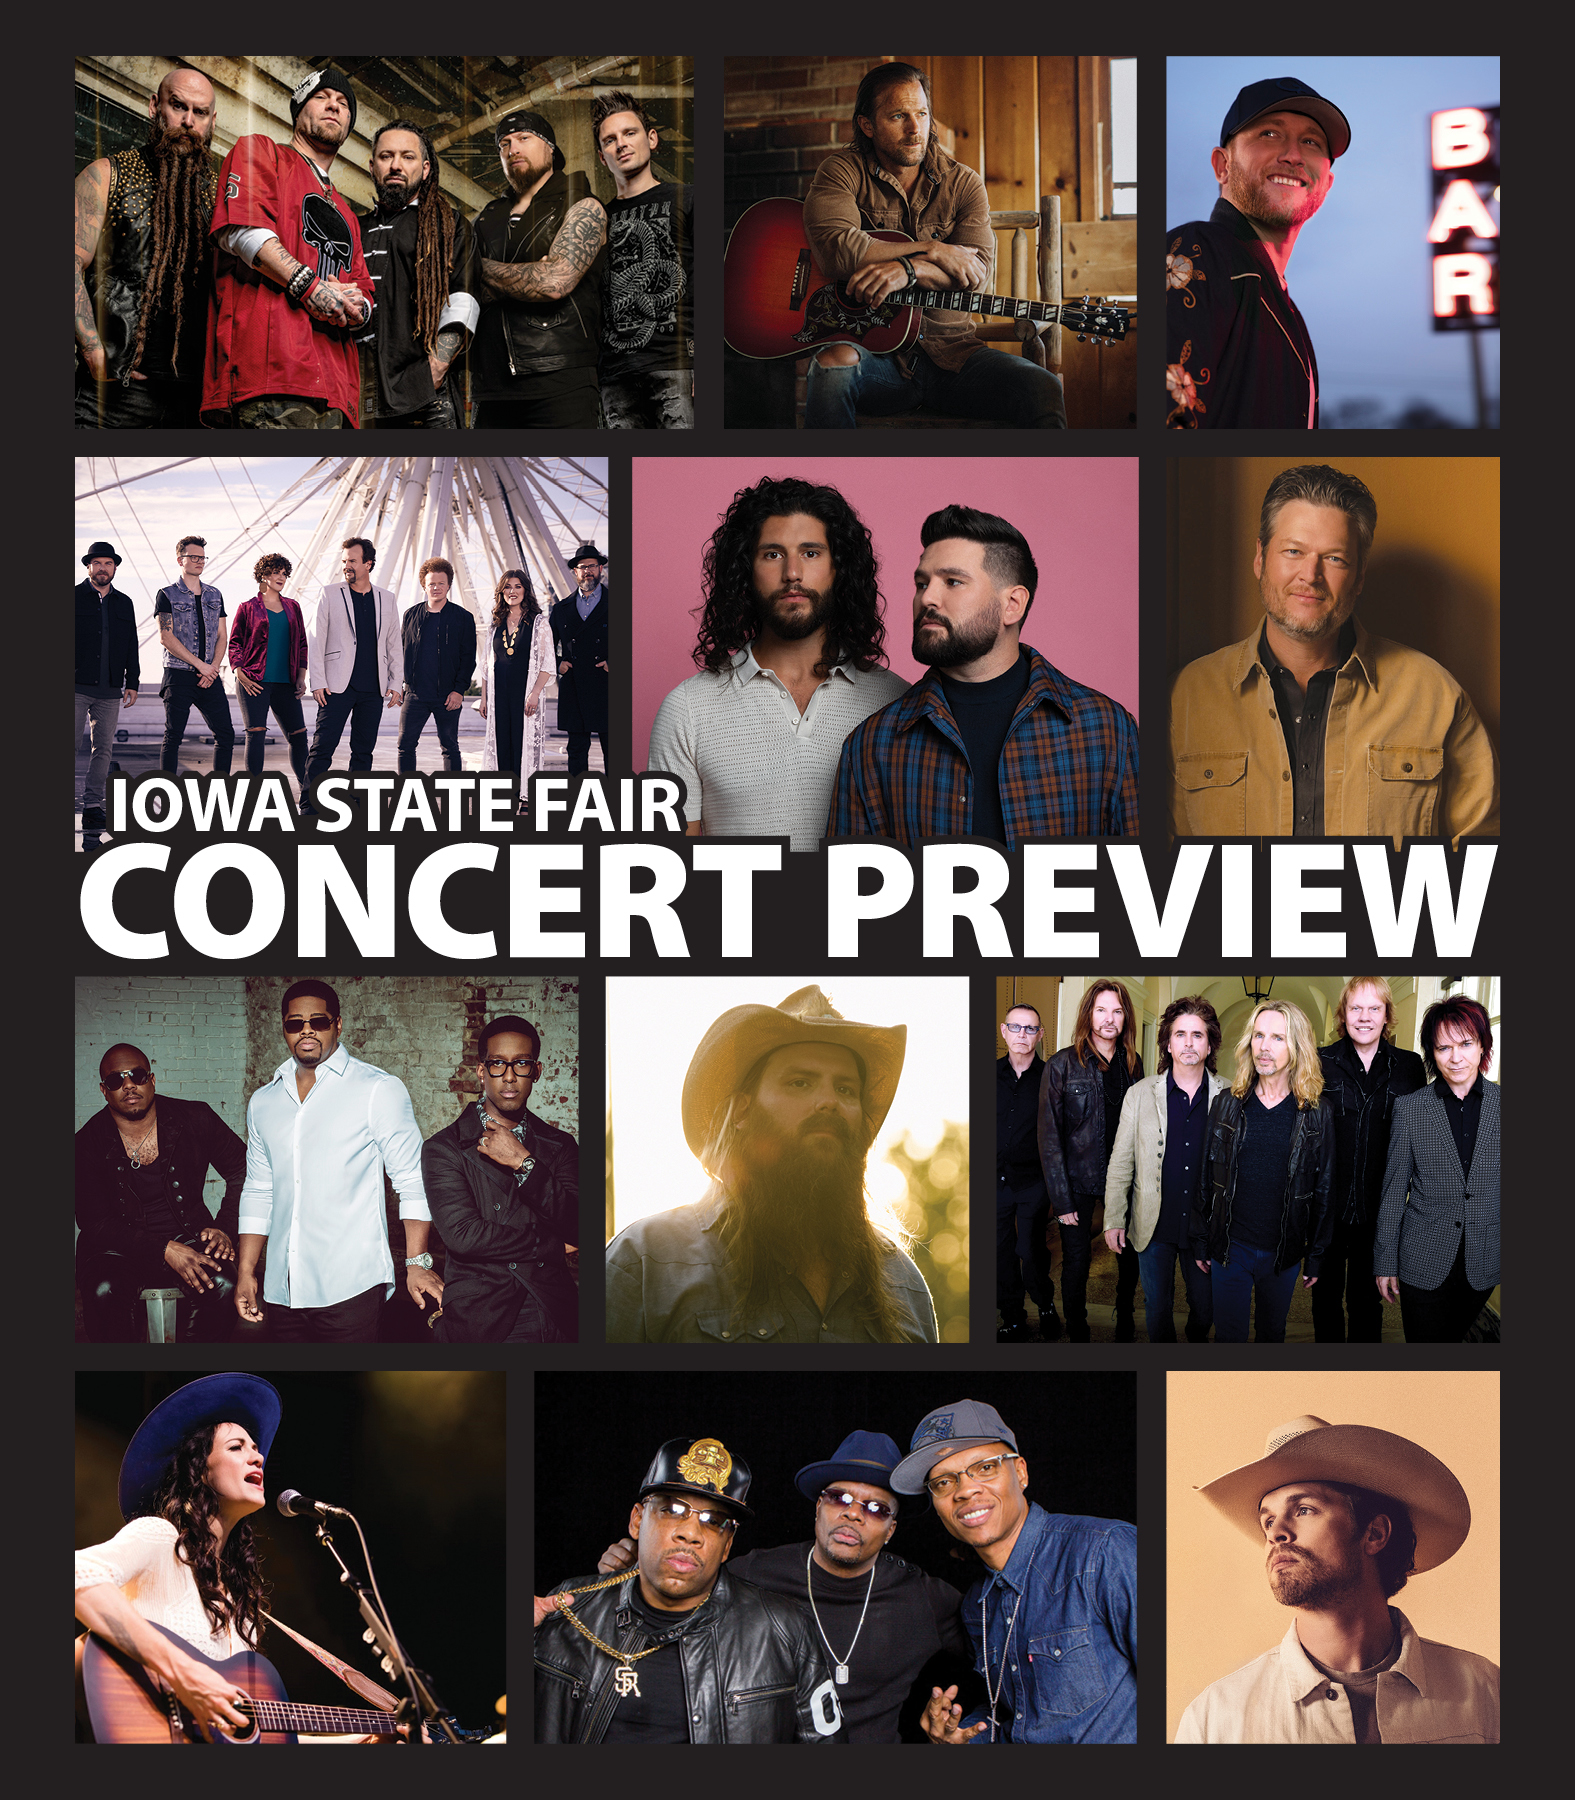 IOWA STATE FAIR CONCERT PREVIEW CITYVIEW